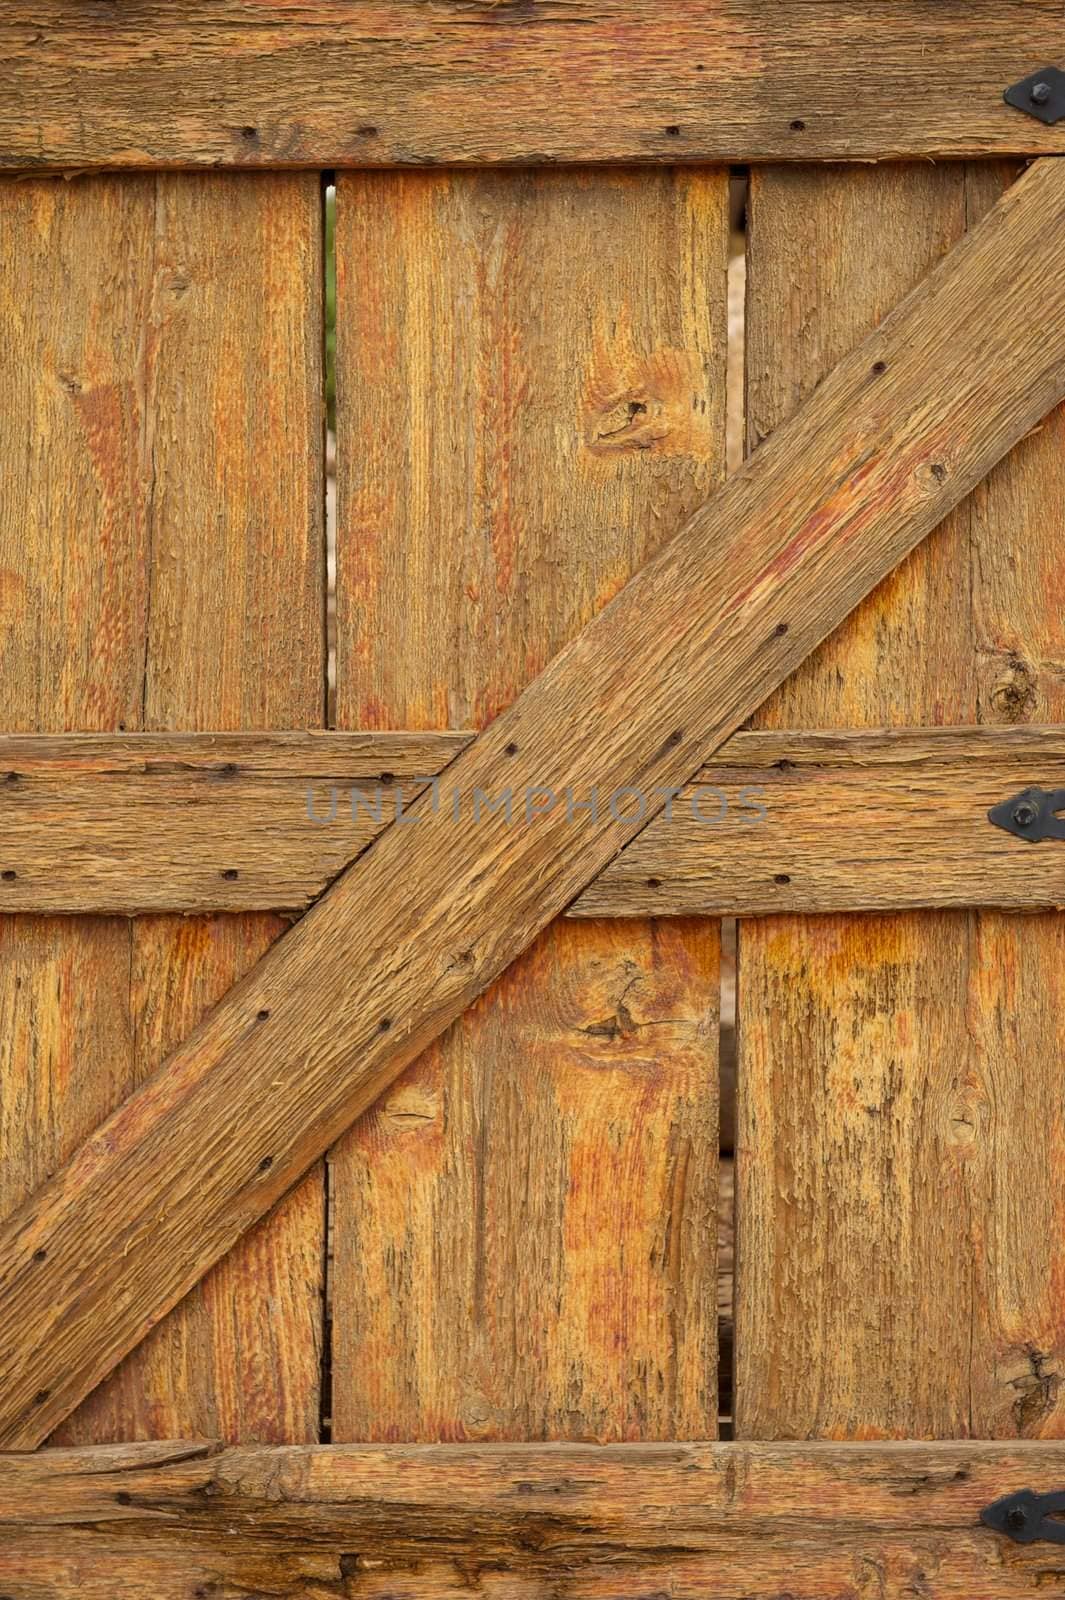 A worn and aged wooden gate with rusty nails and cracked paint